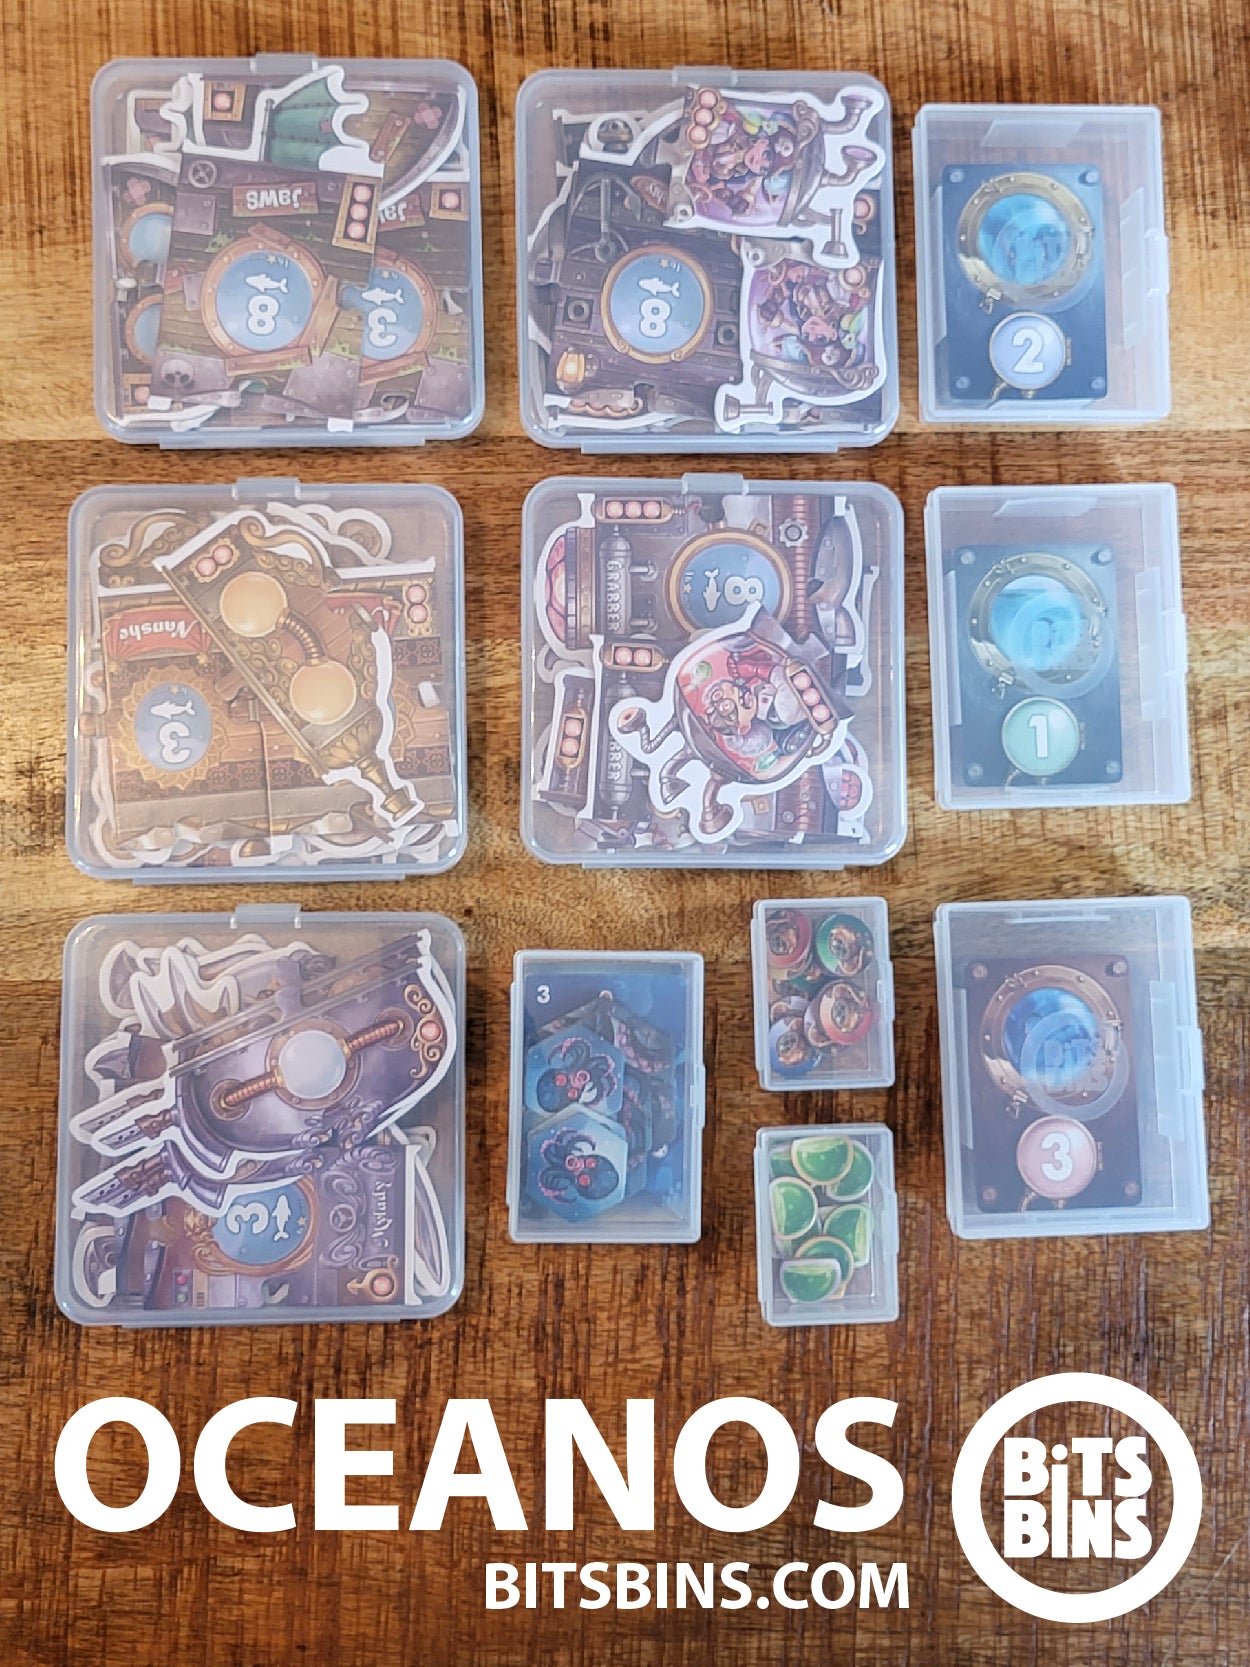 RECOMMENDED OCEANOS BitsBins - 2 Minis, 1 XL, 3 Card Boxes, 5 Flats